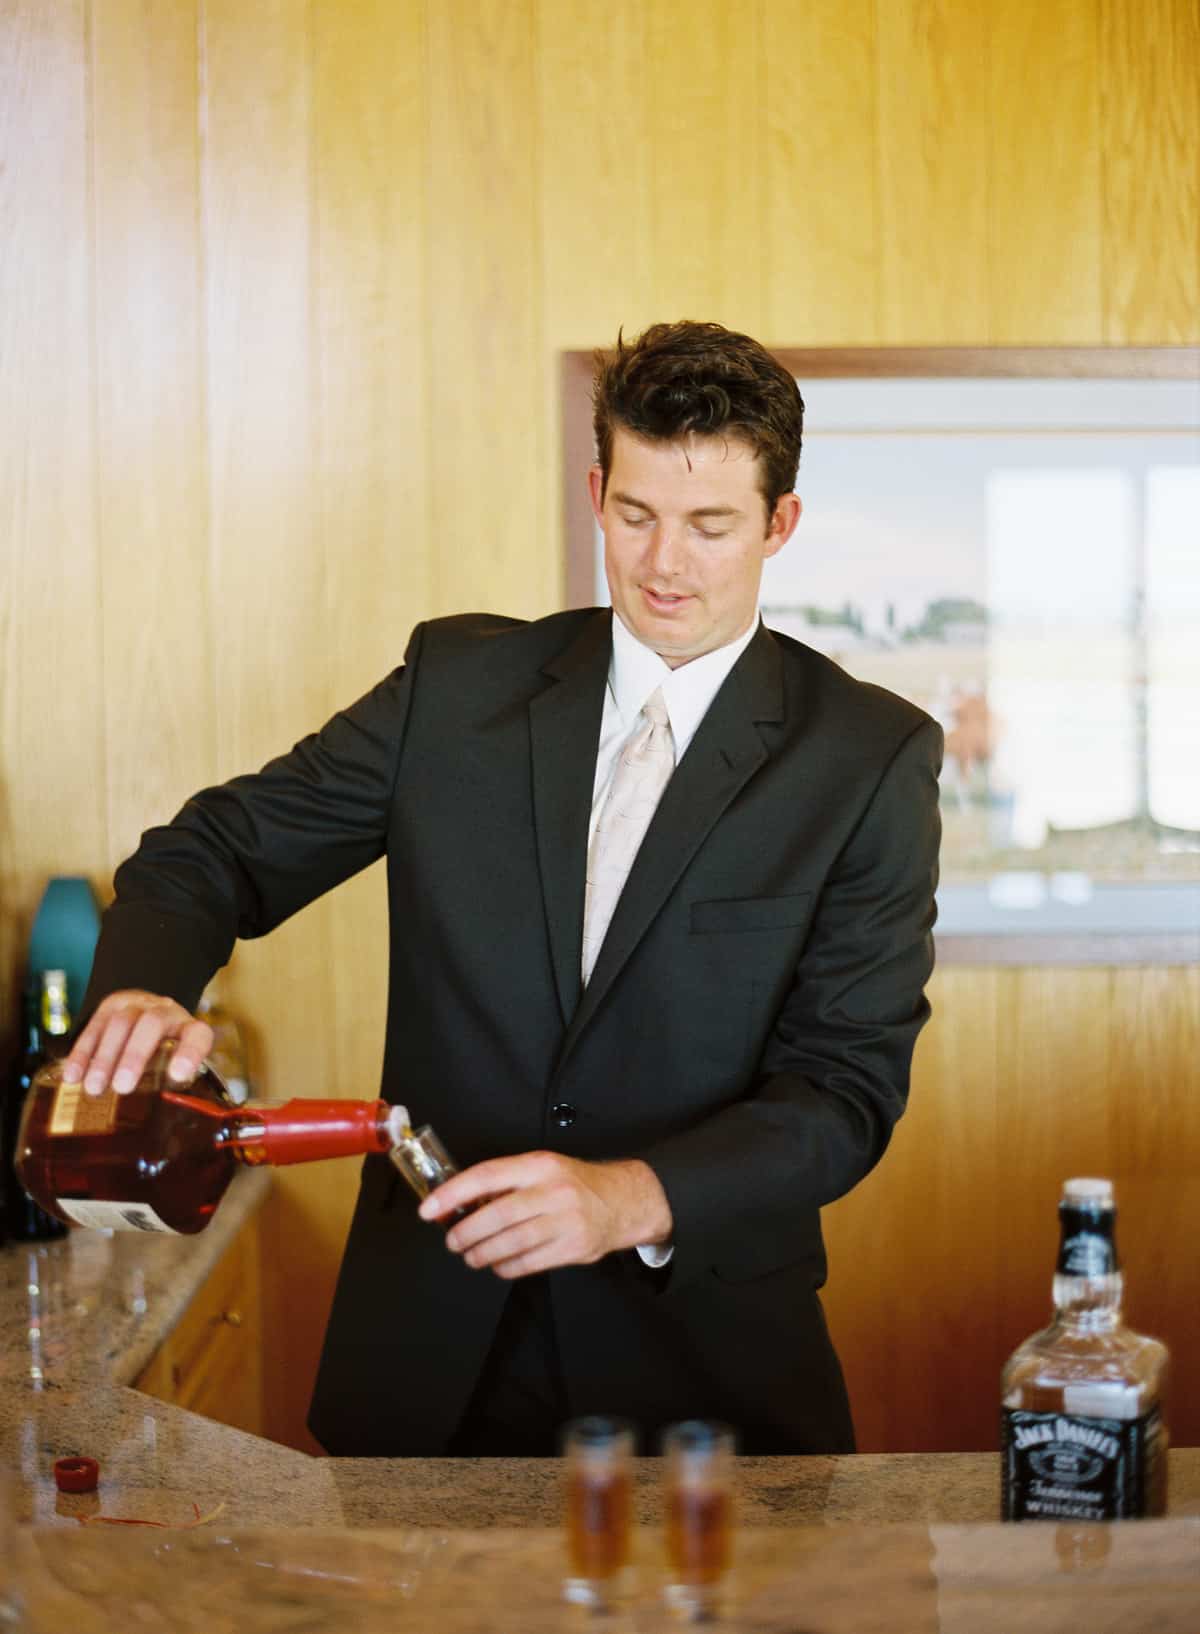 Groomsman pouring a drink